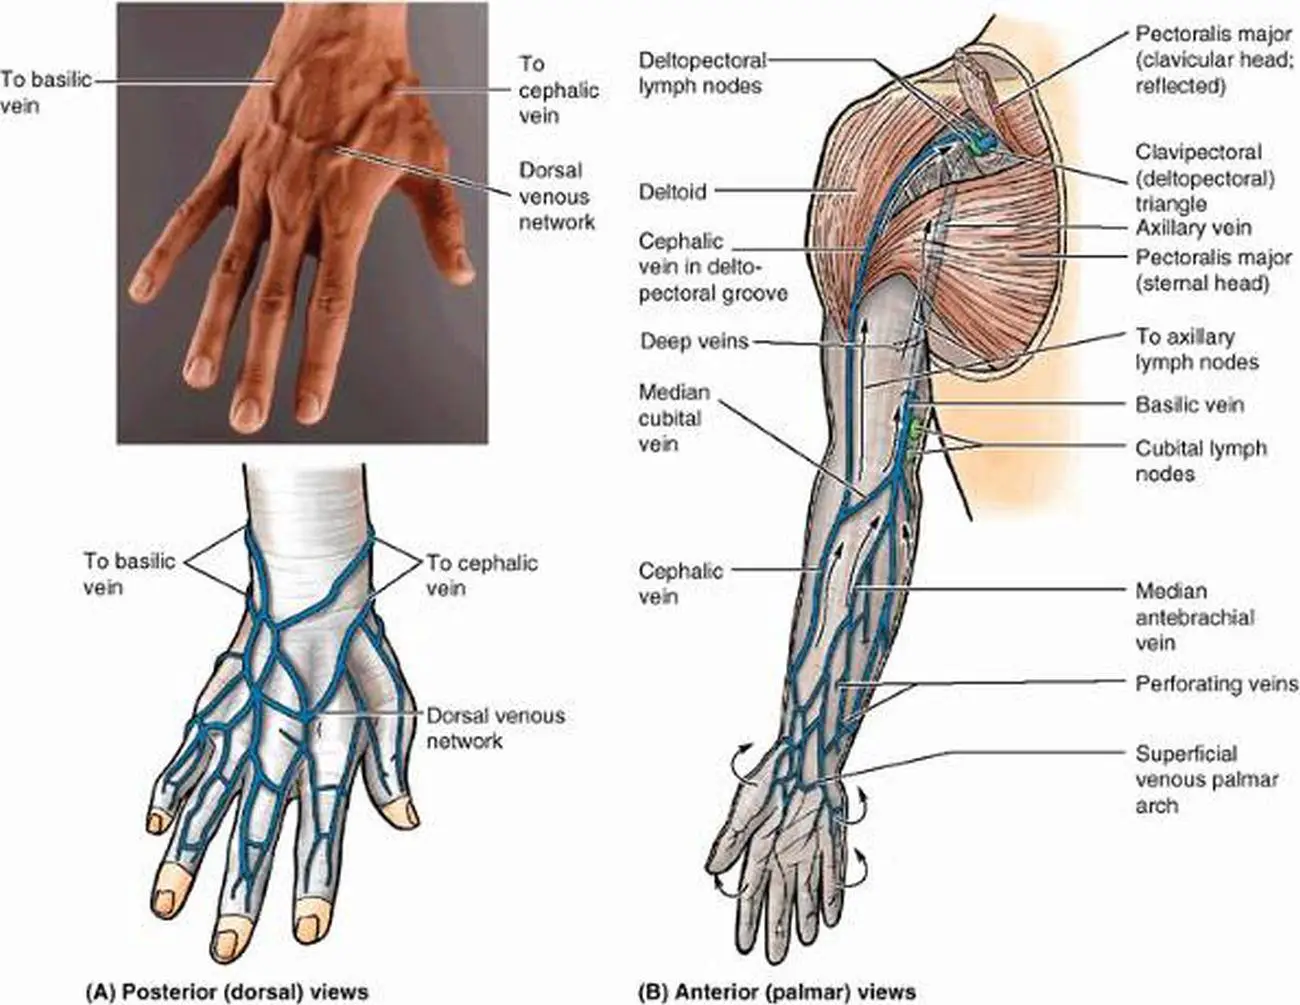 Pictures Of Basilic Vein